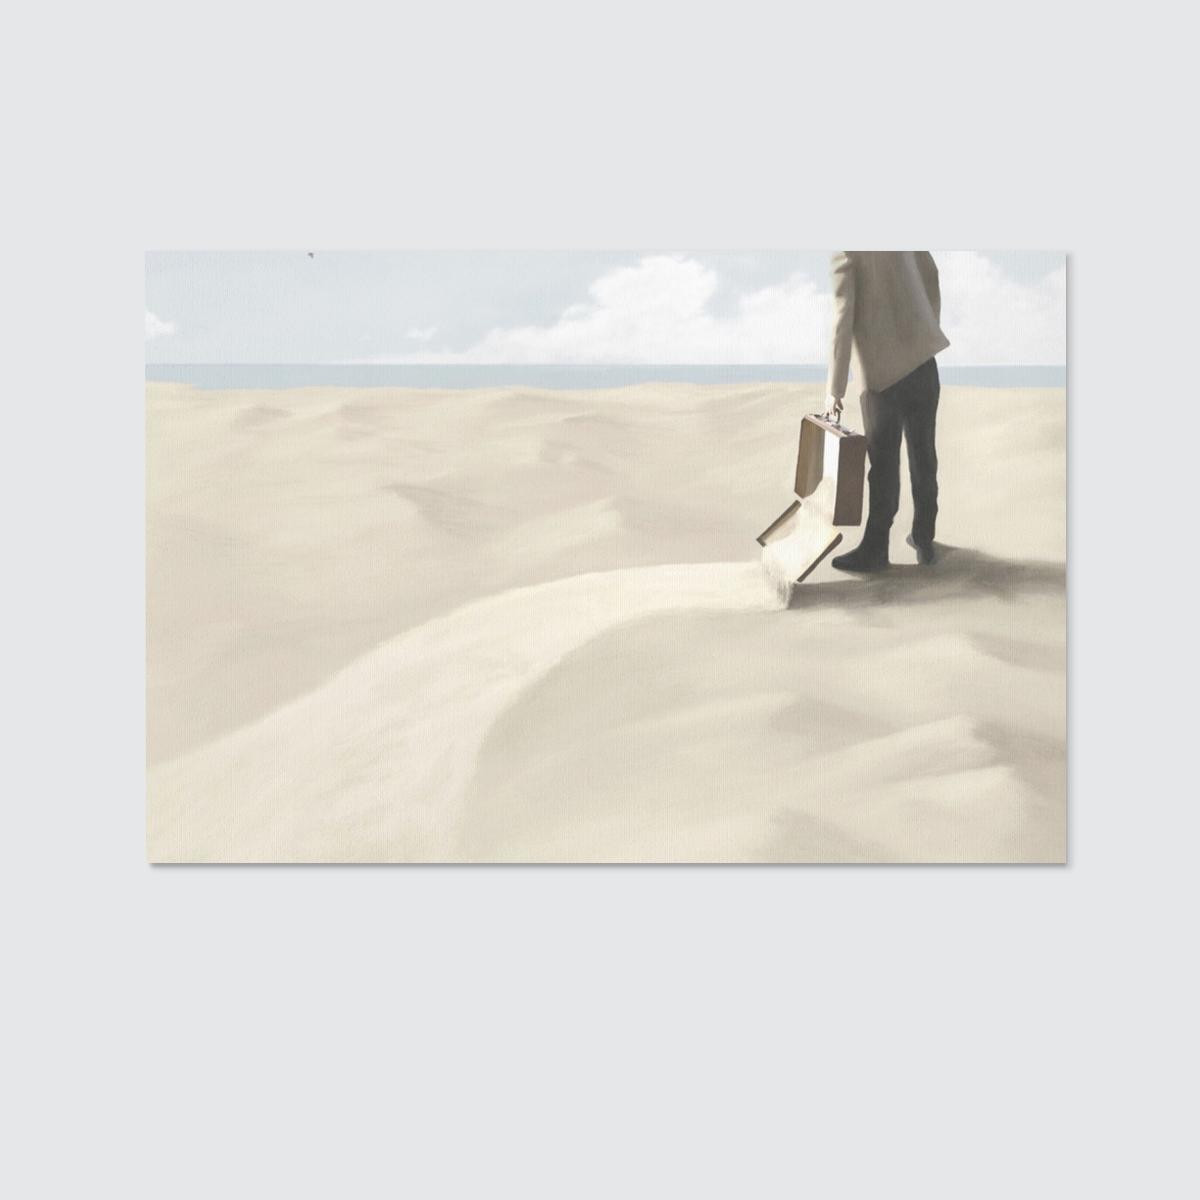 Man with the suitcase on Full Sand Surreal Style Canvas Wall Art